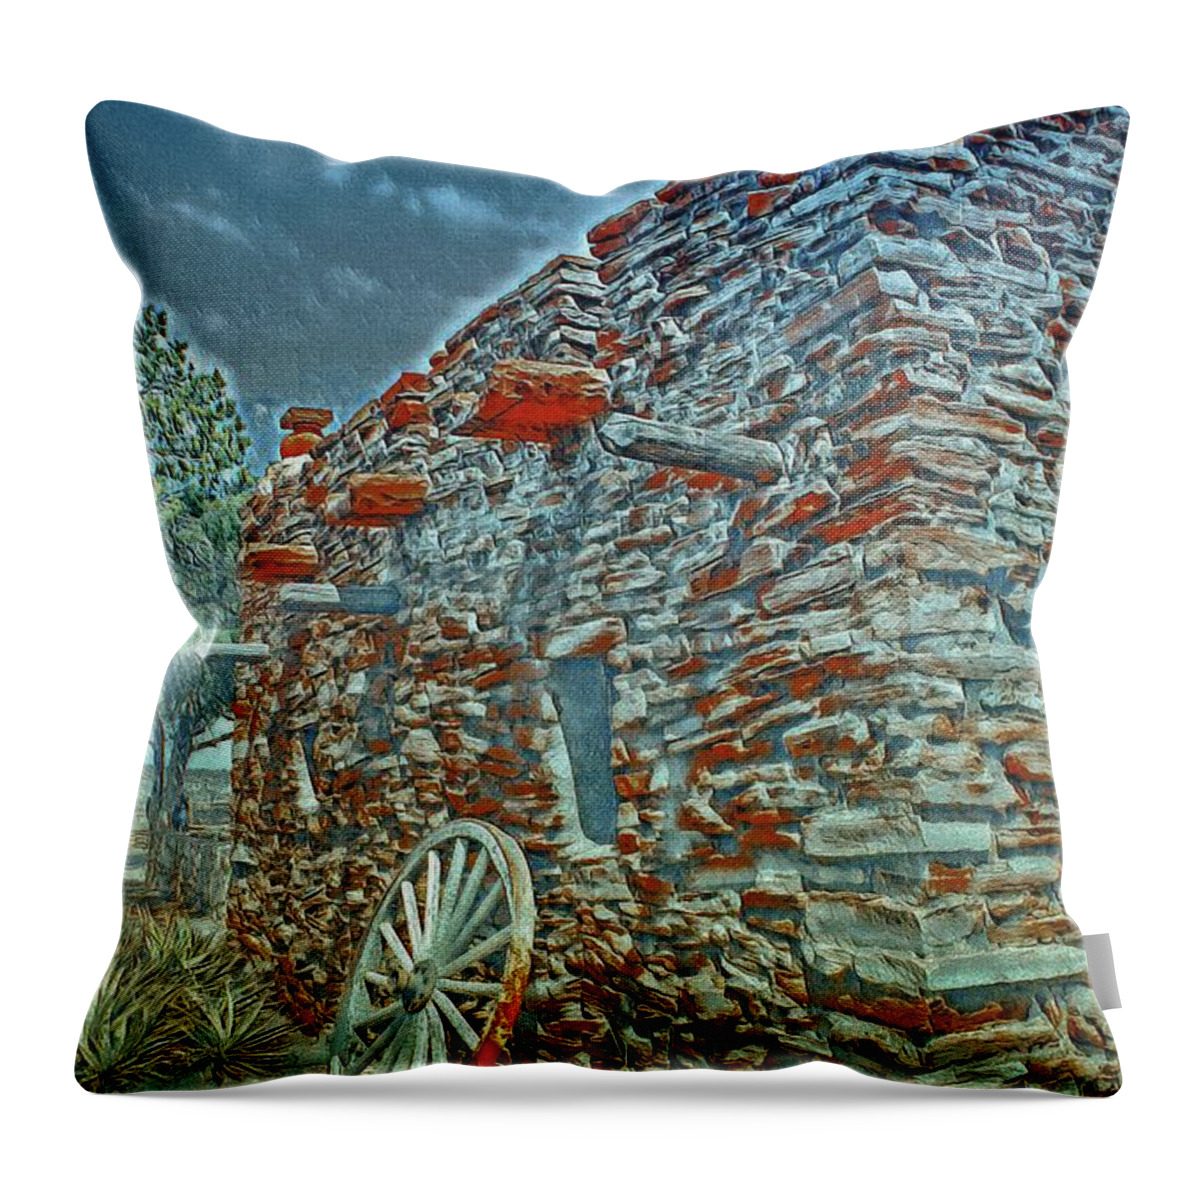 Grand Canyon. Southern Rim Grand Canyon Throw Pillow featuring the digital art Grand Canyon Stone House by Jerry Cahill